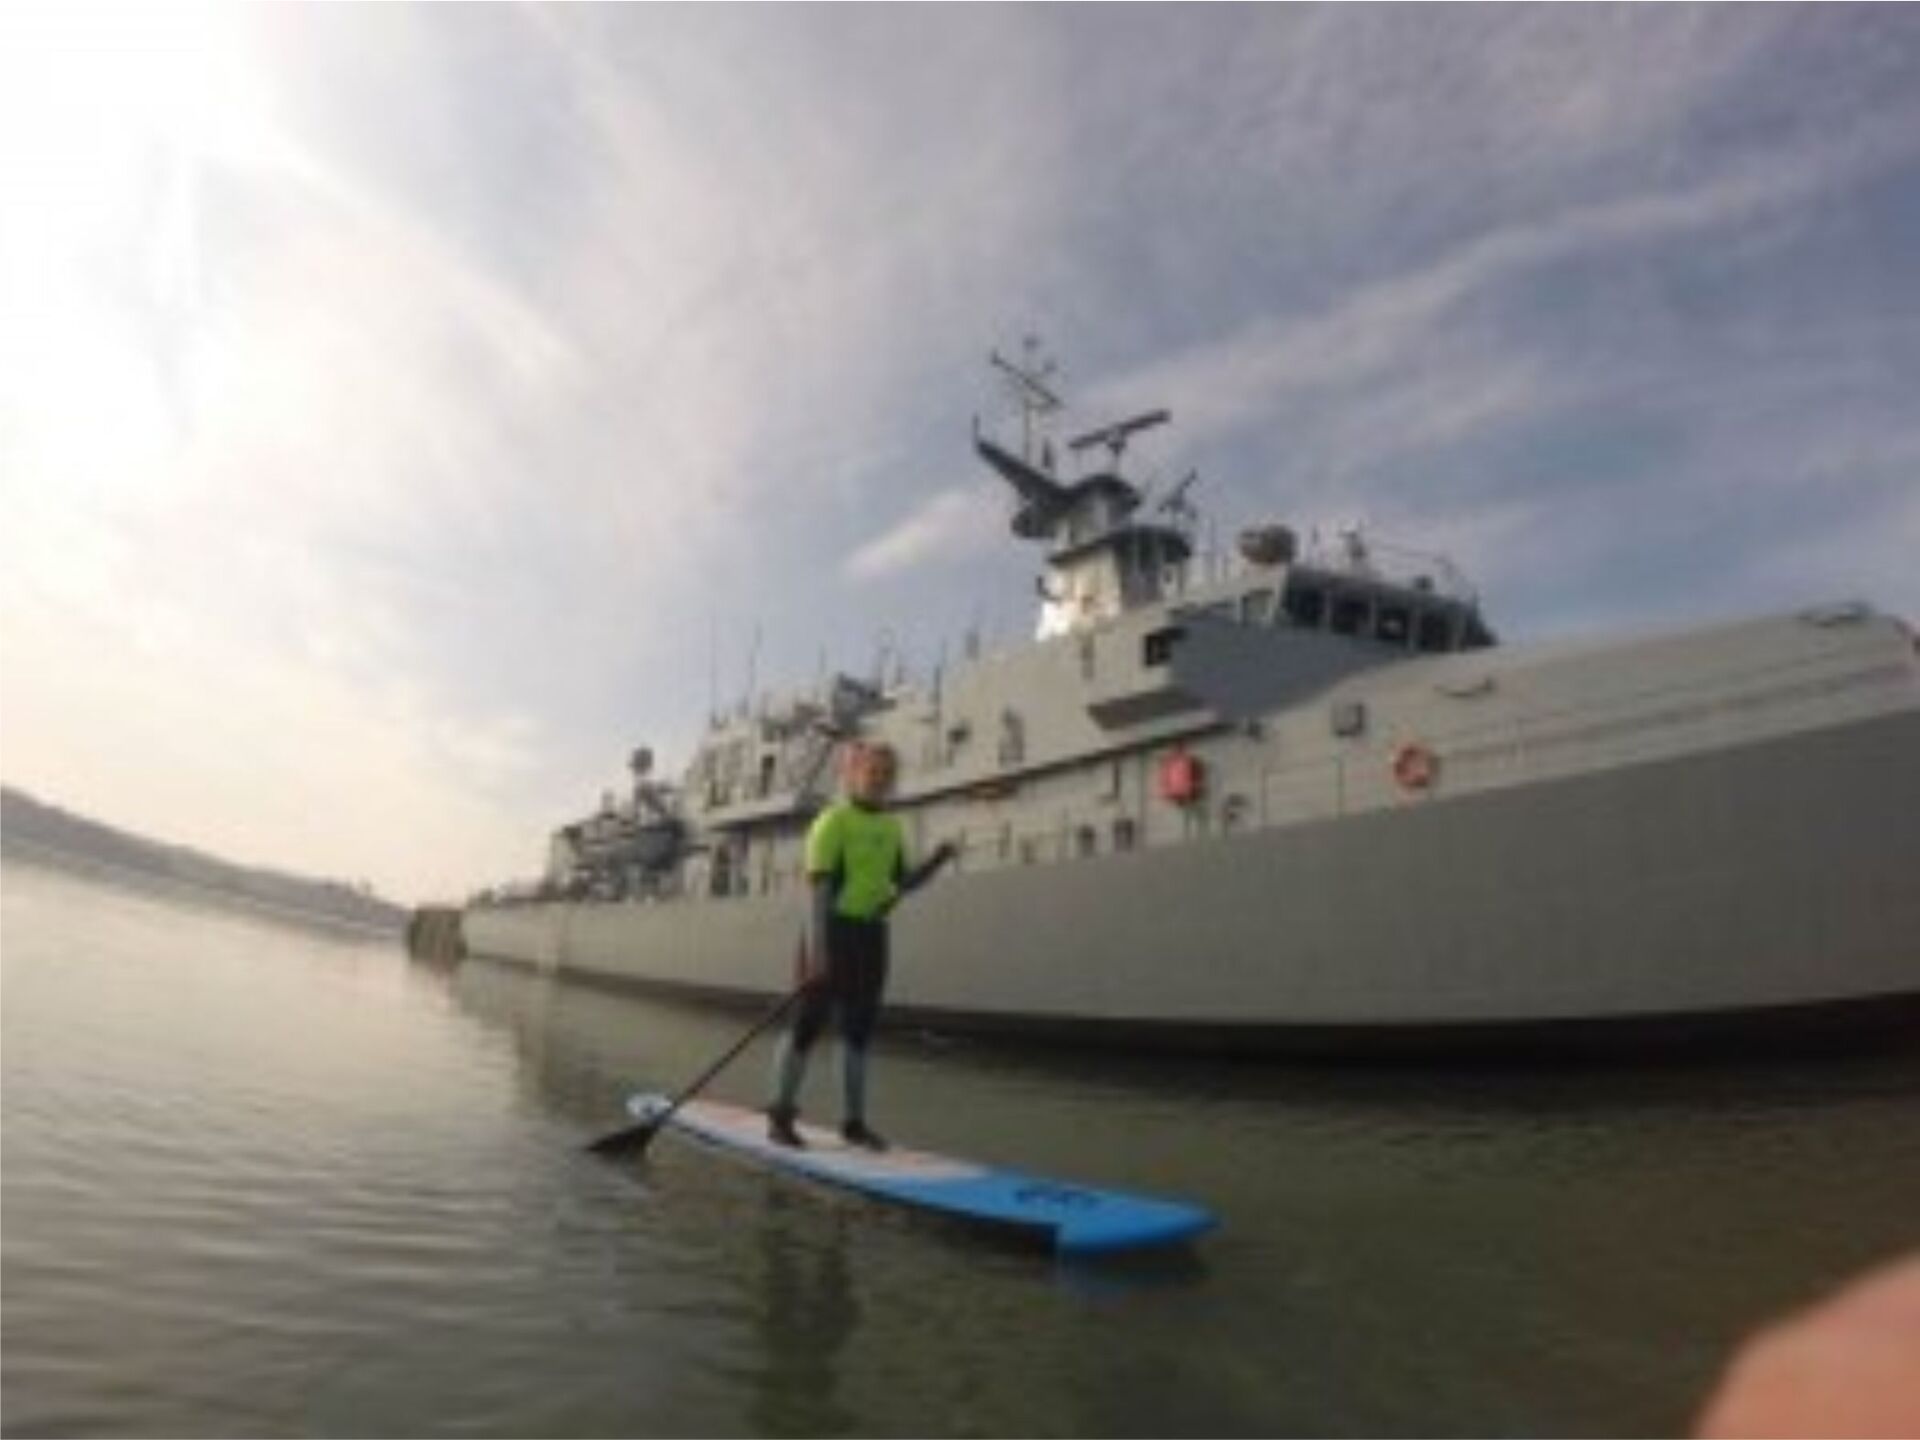 Stand up paddle board in Appledore by the shipyard steeped in history